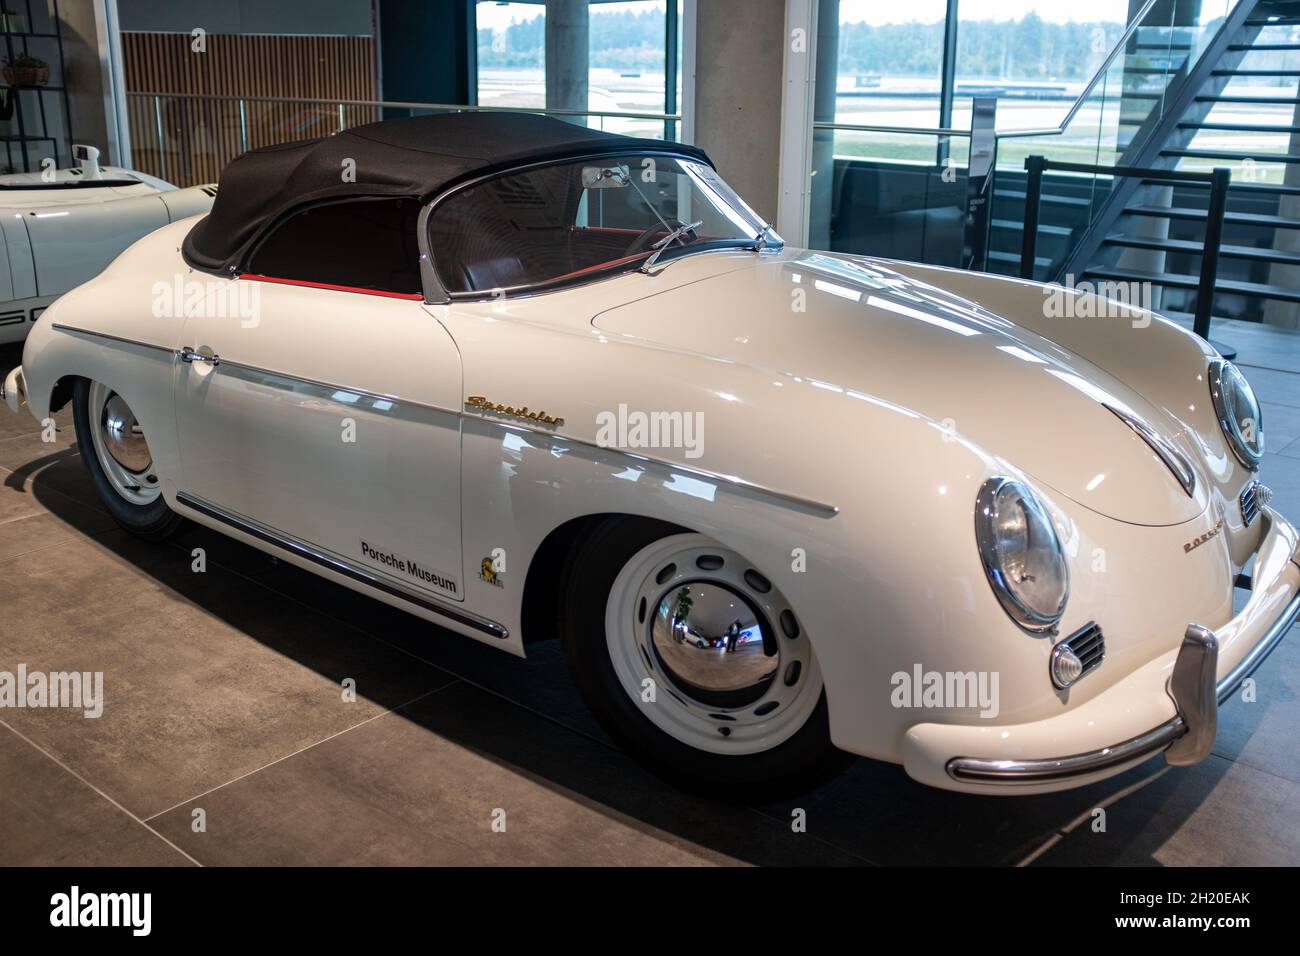 Porsche 356 Speedster in museum collection at the Porsche Customer Experience Centre, Hokenheimring, Baden-Württemberg, Germany Stock Photo